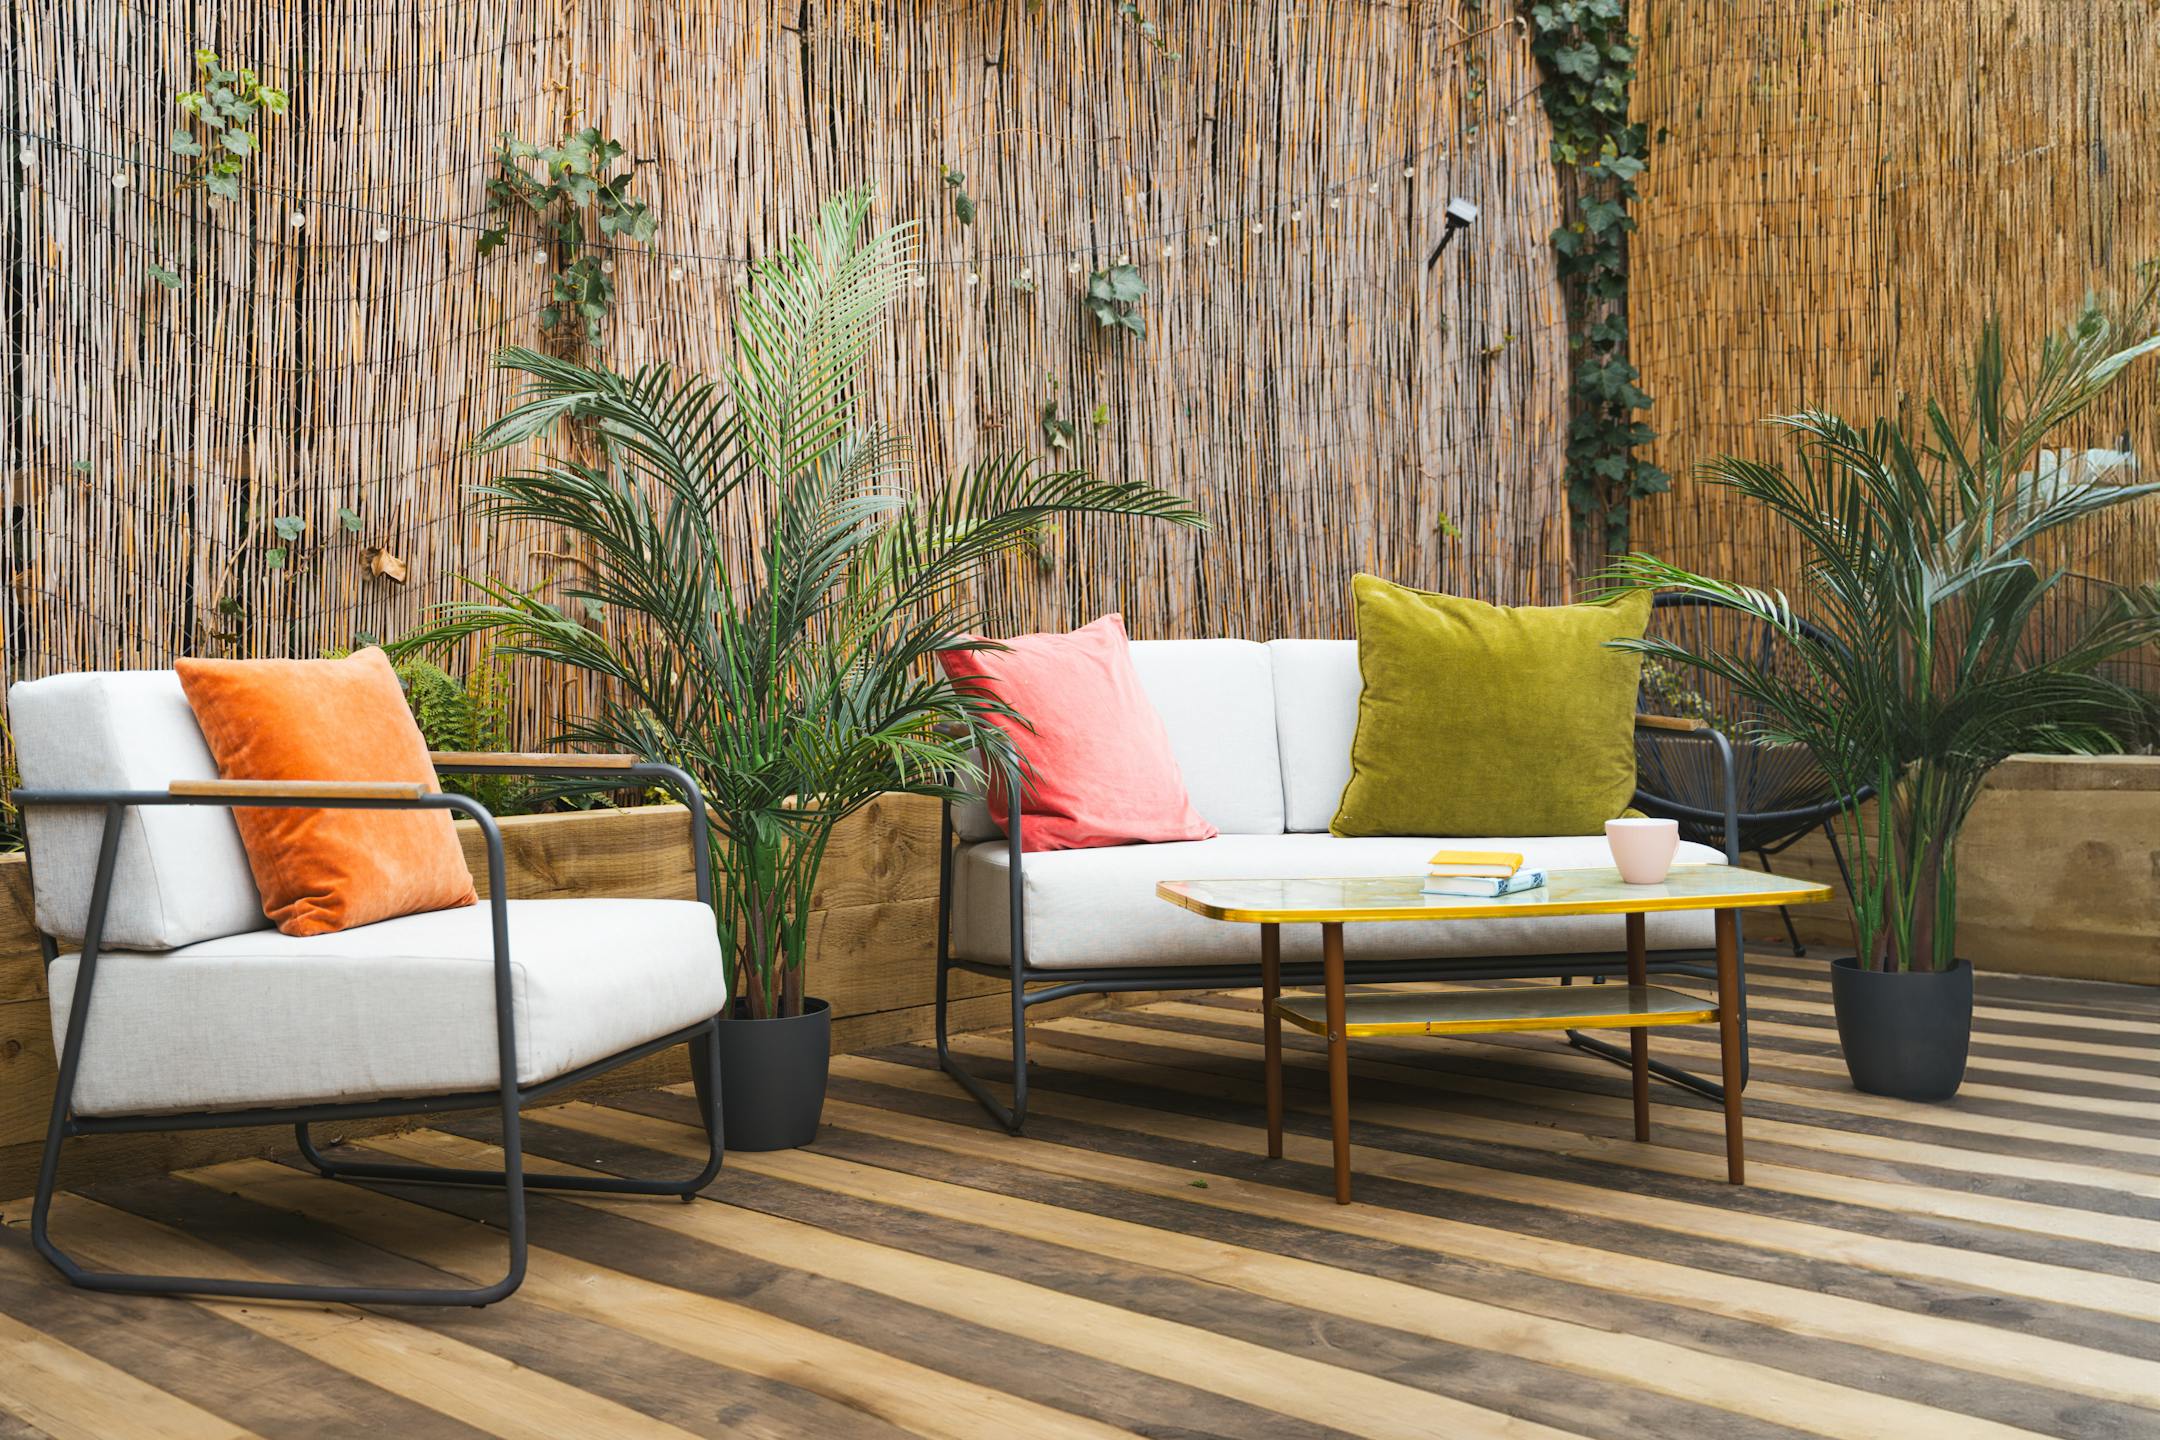 Artificial areca palm tree on garden decking with chairs and table